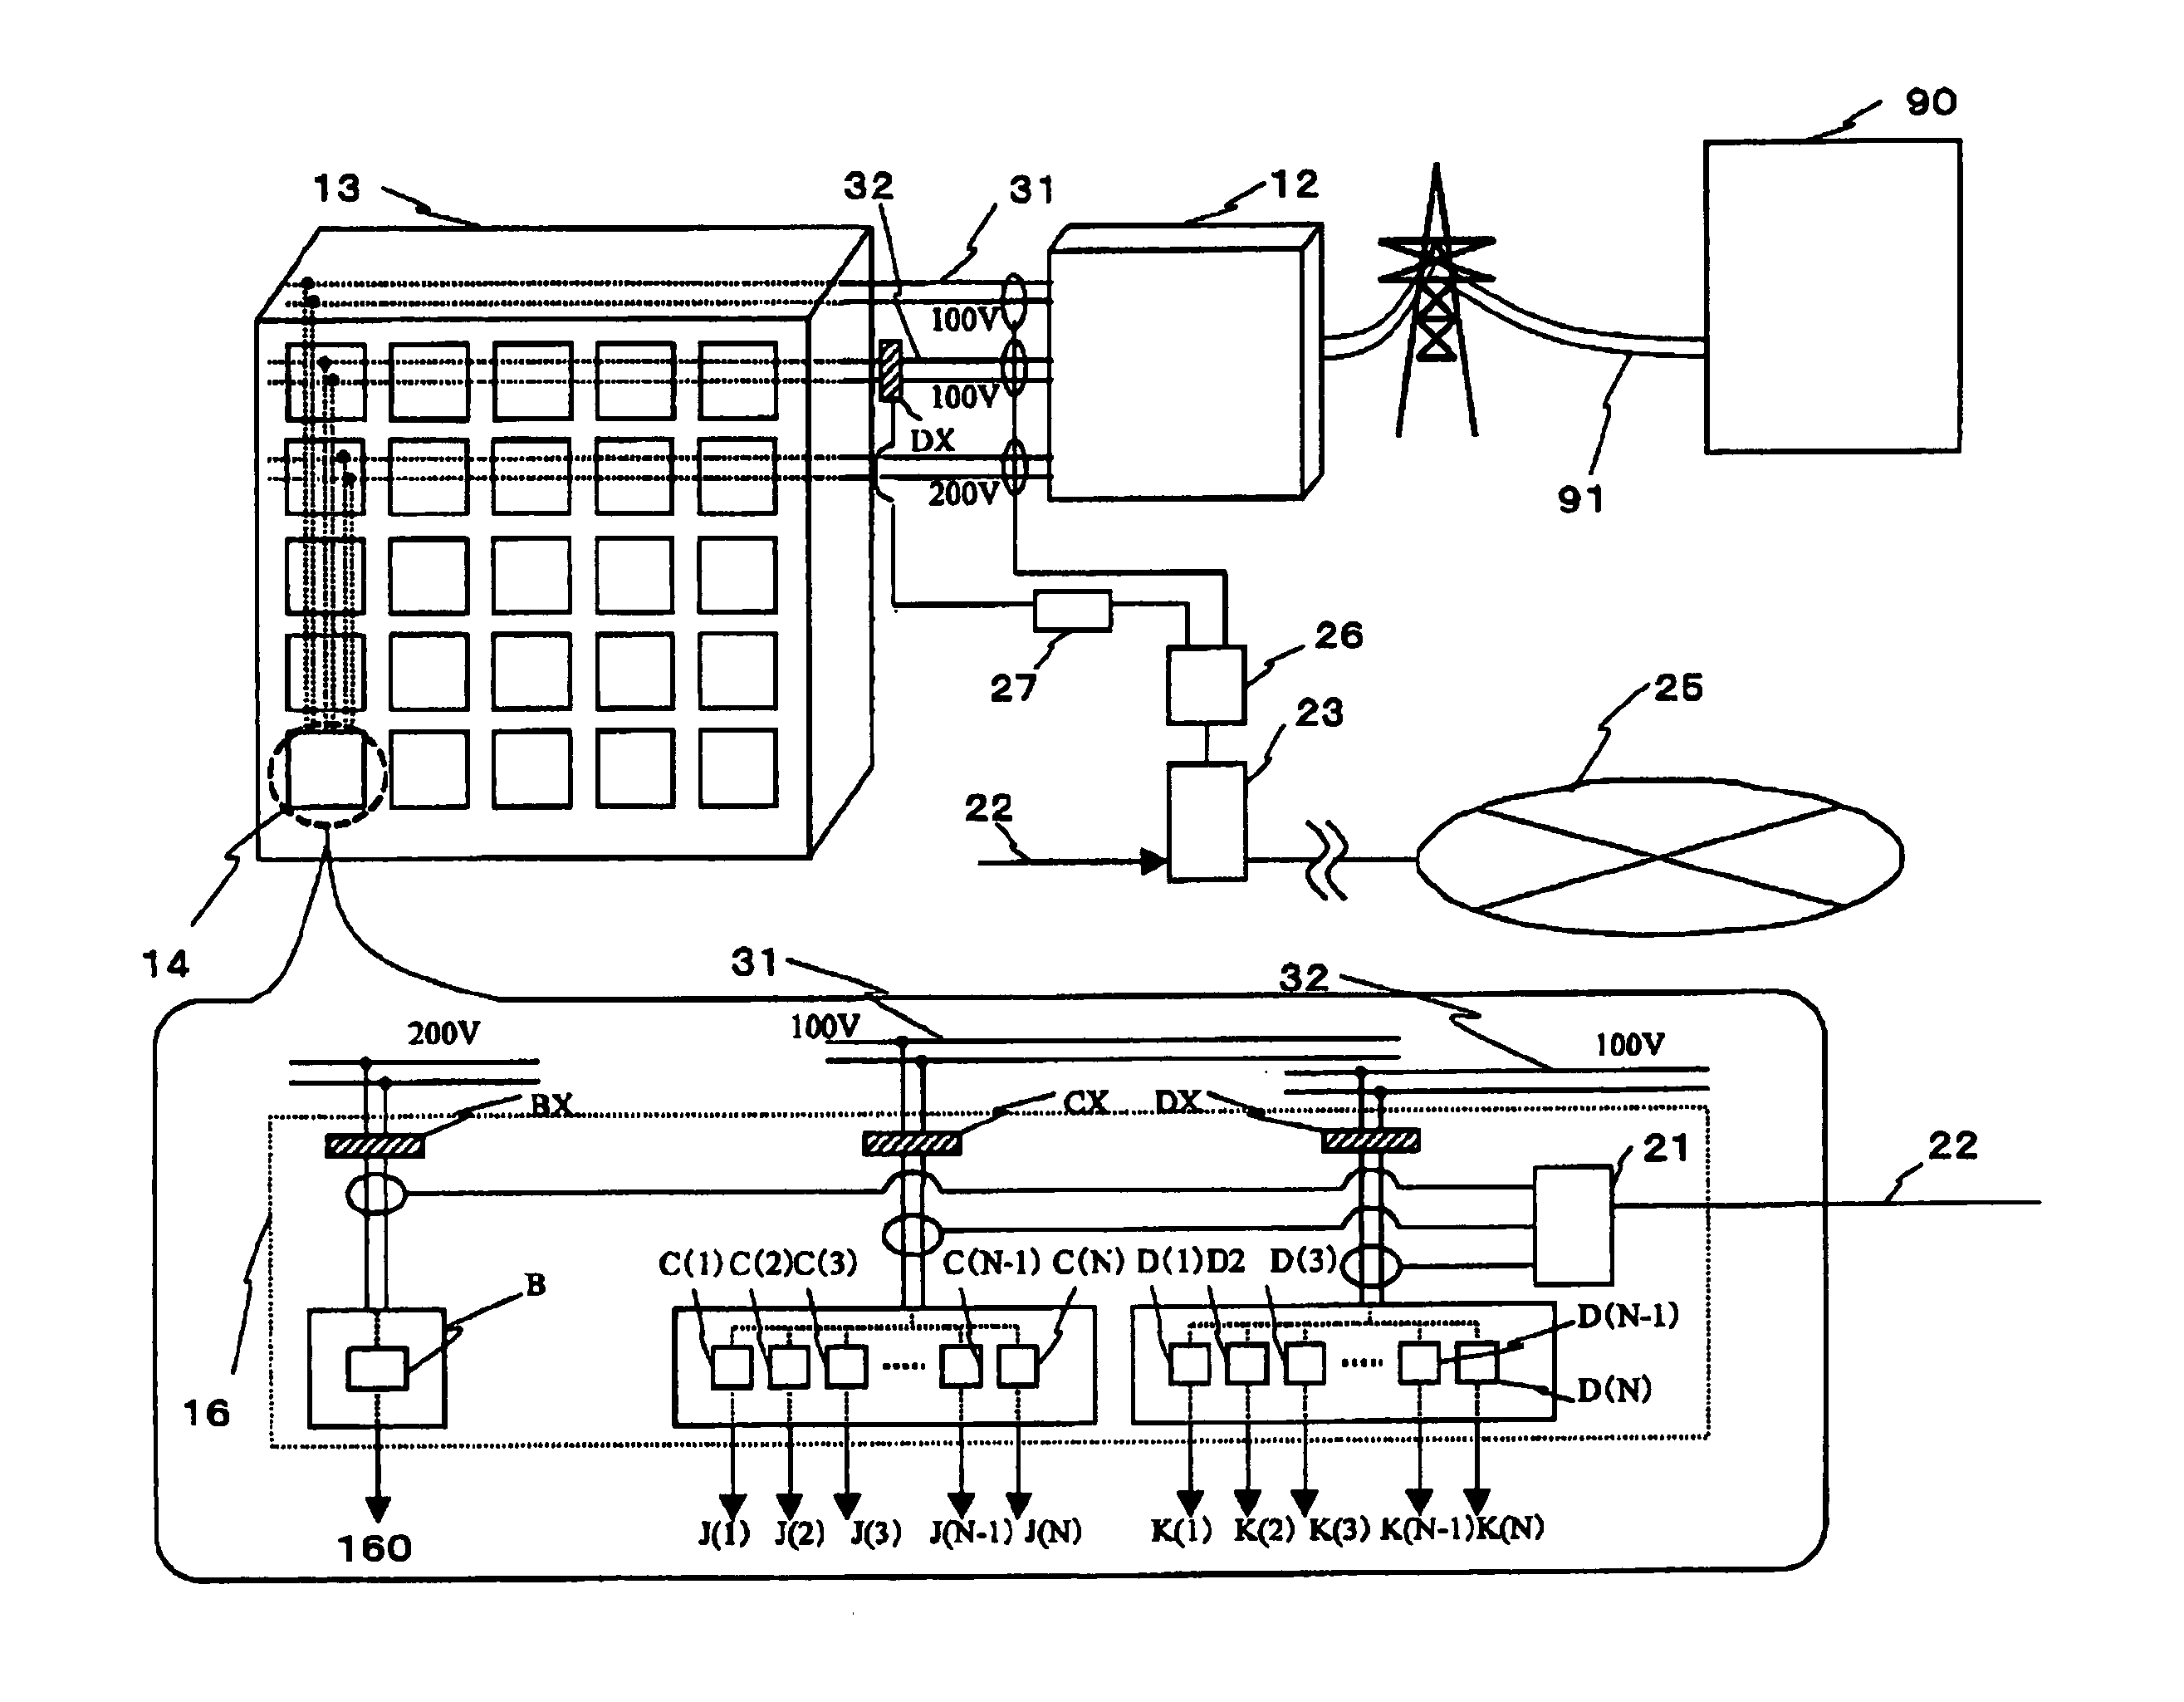 Power system for area containing a set of power consumers